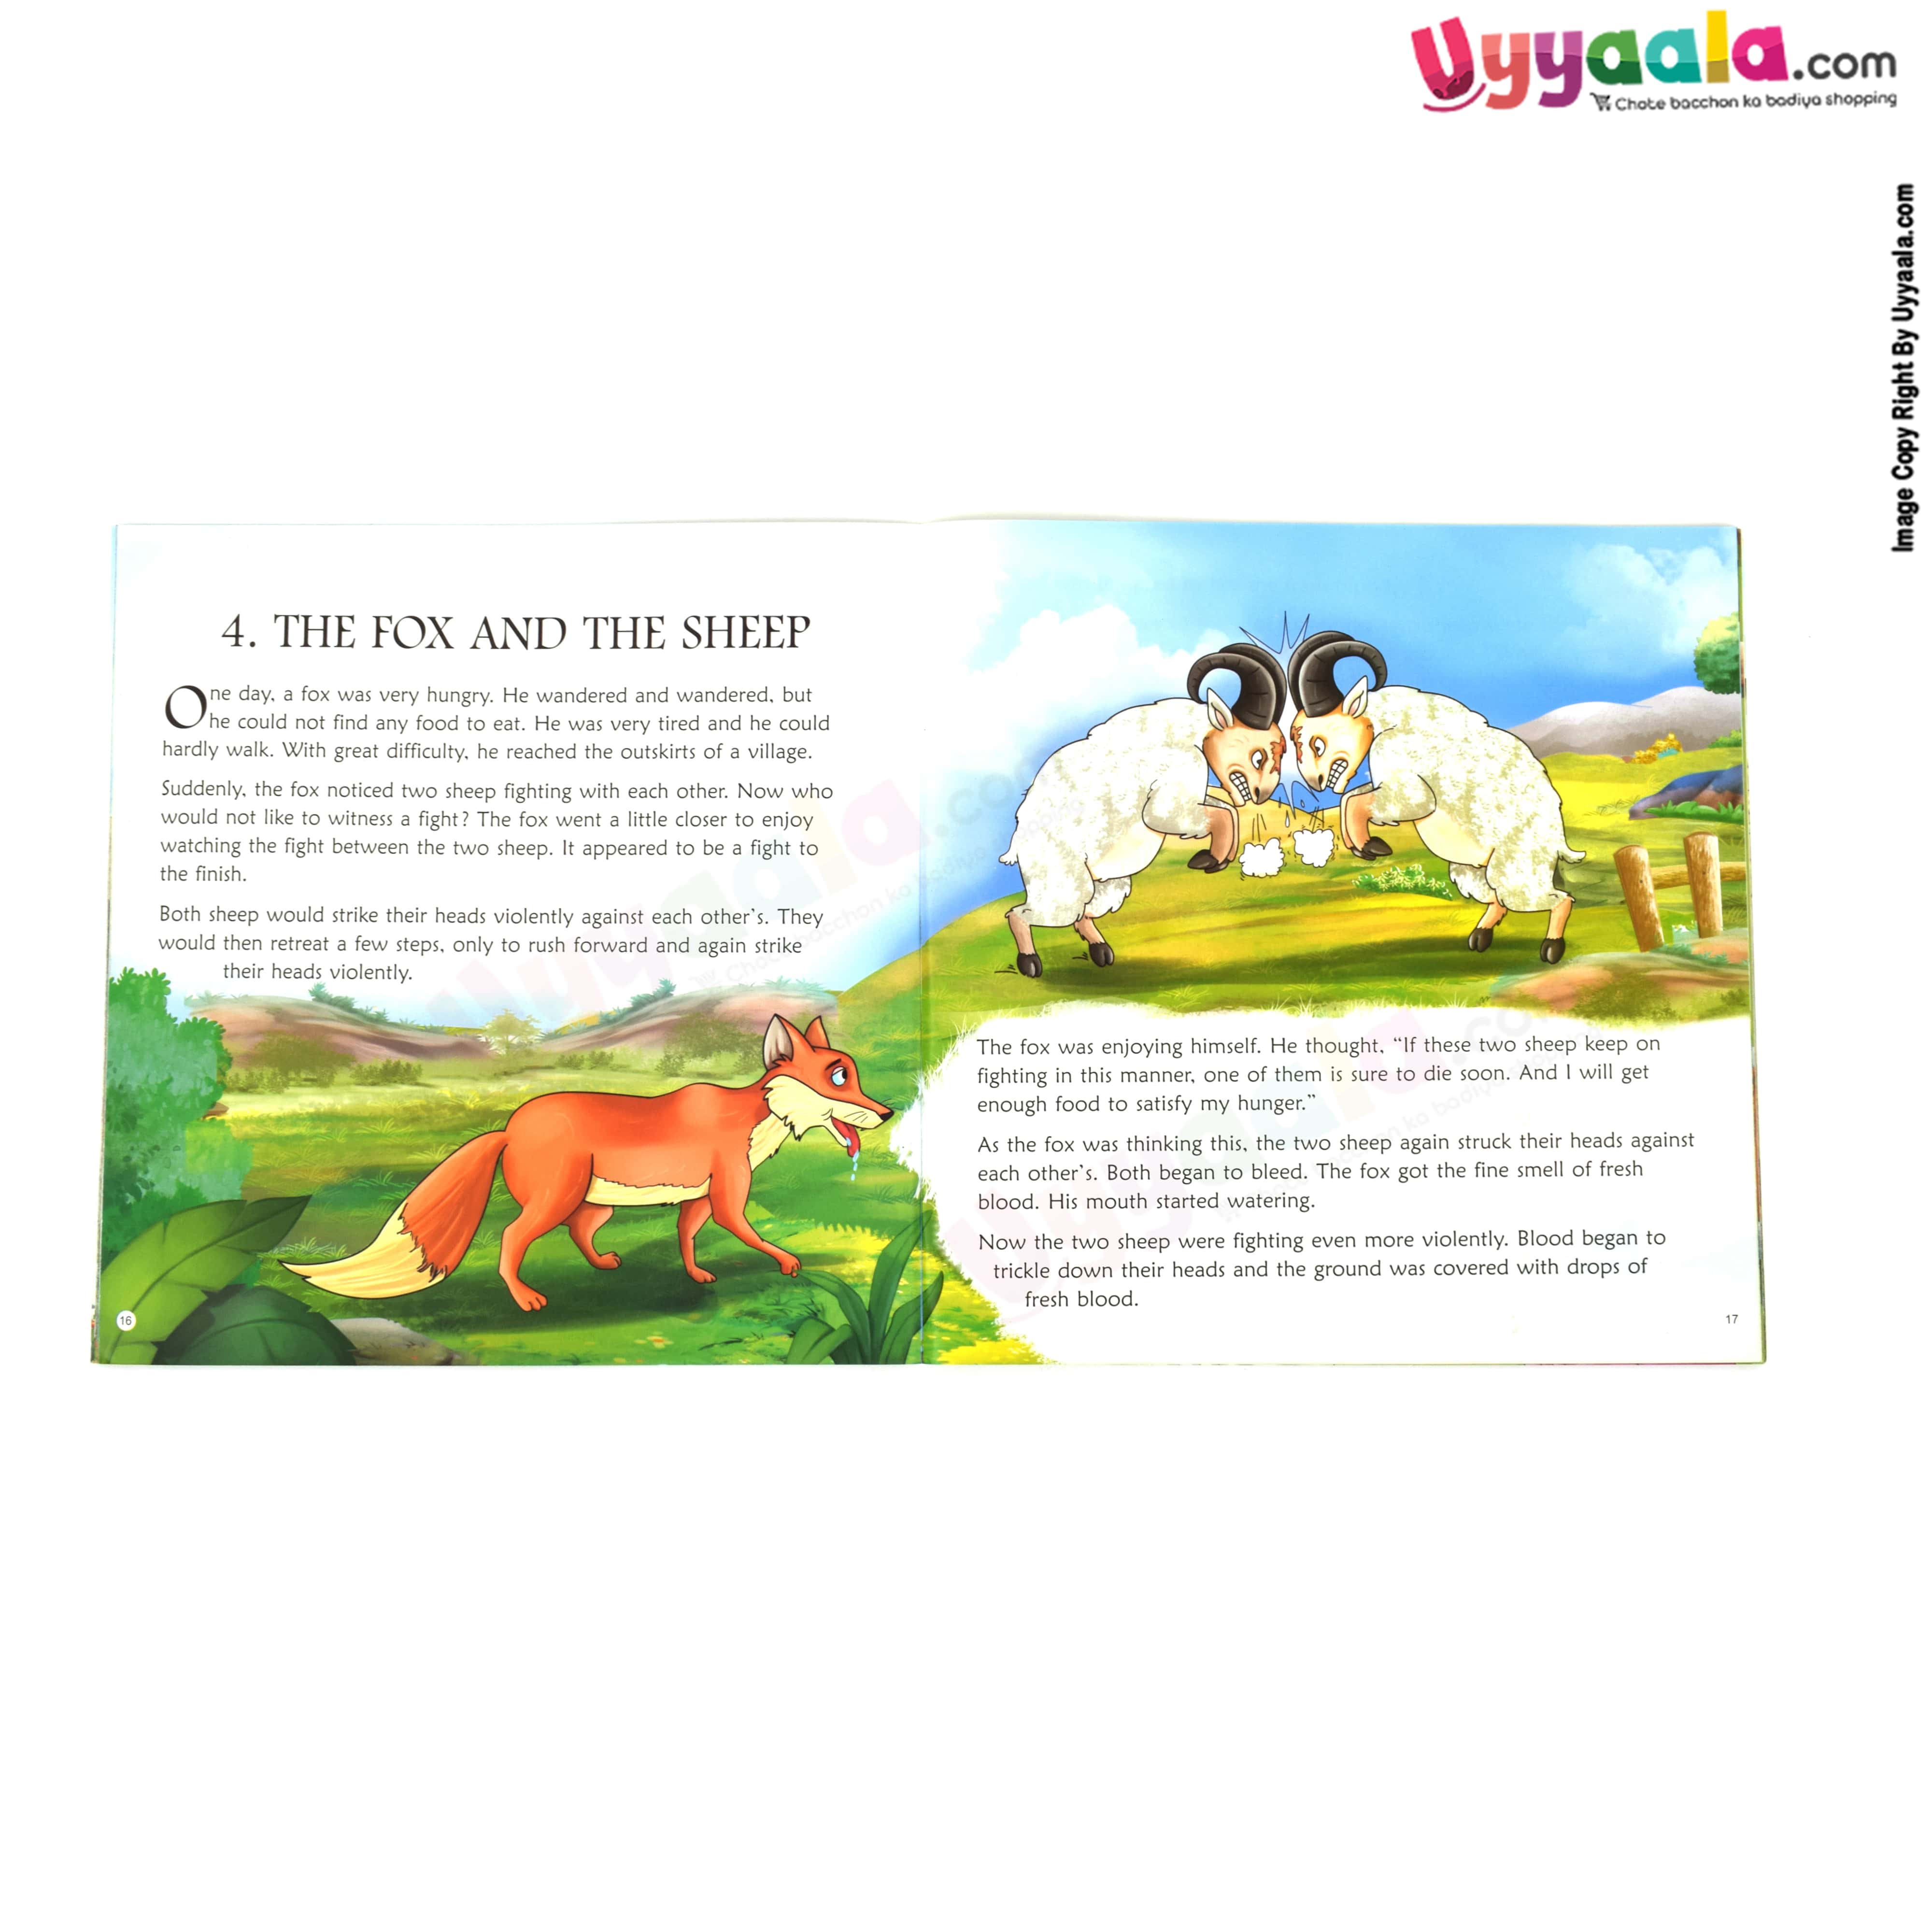 NAVNEET moral tales inspirational stories for children, panchatantra Pack of 4